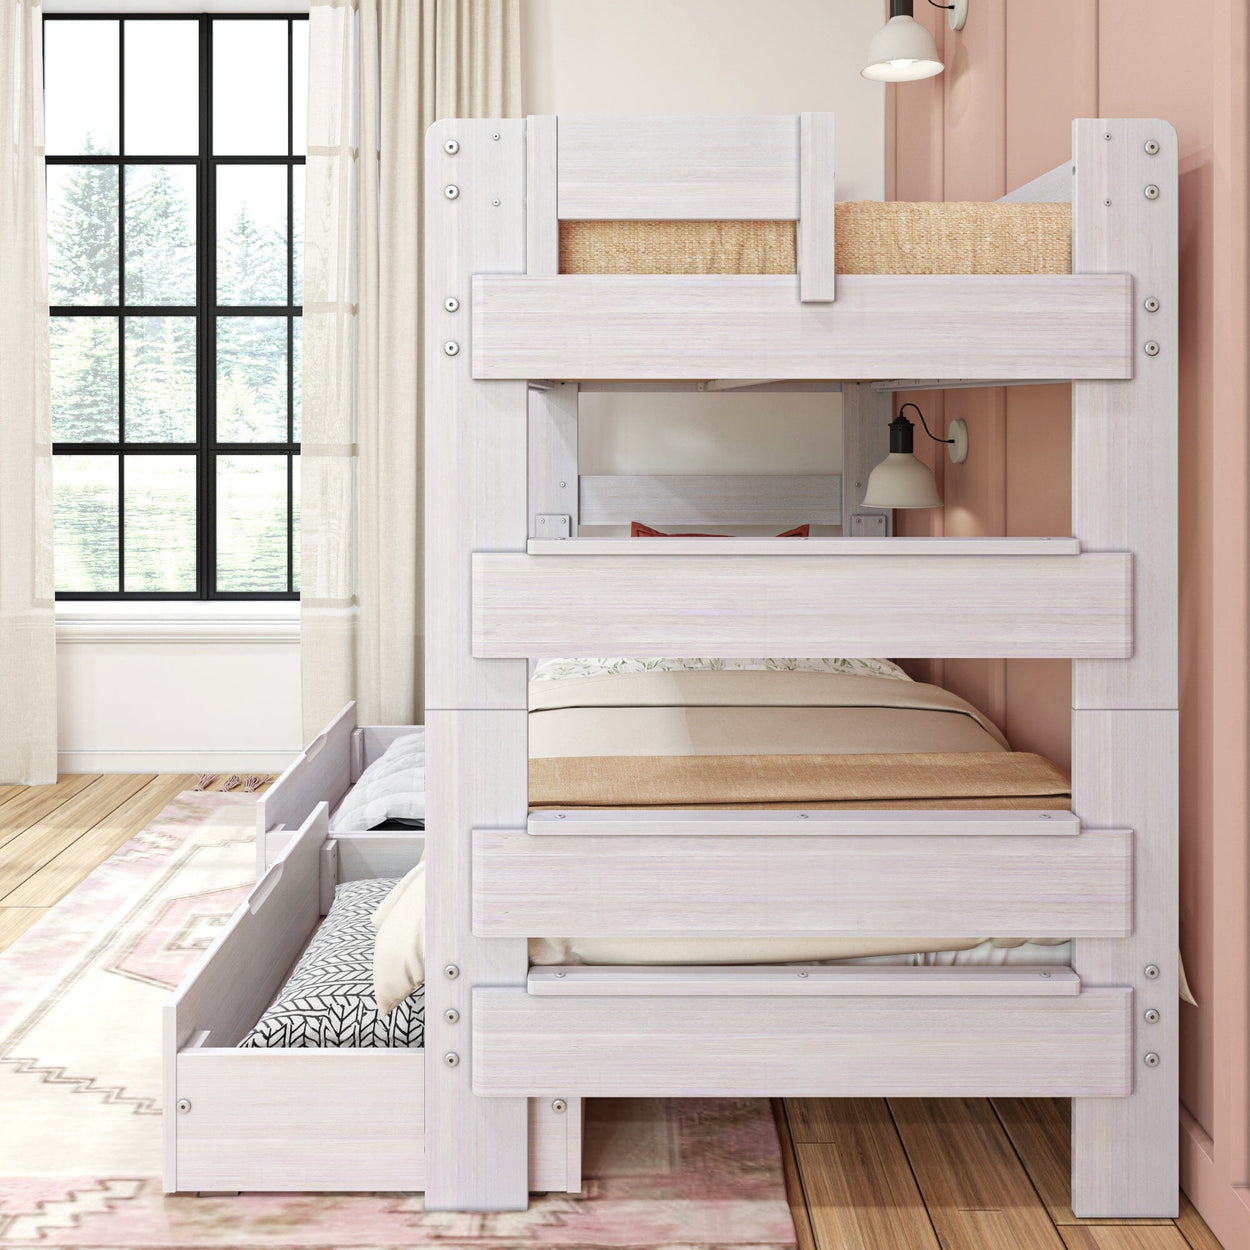 197201-182 : Bunk Beds Farmhouse Twin over Twin Bunk Bed with Storage Drawers, White Wash